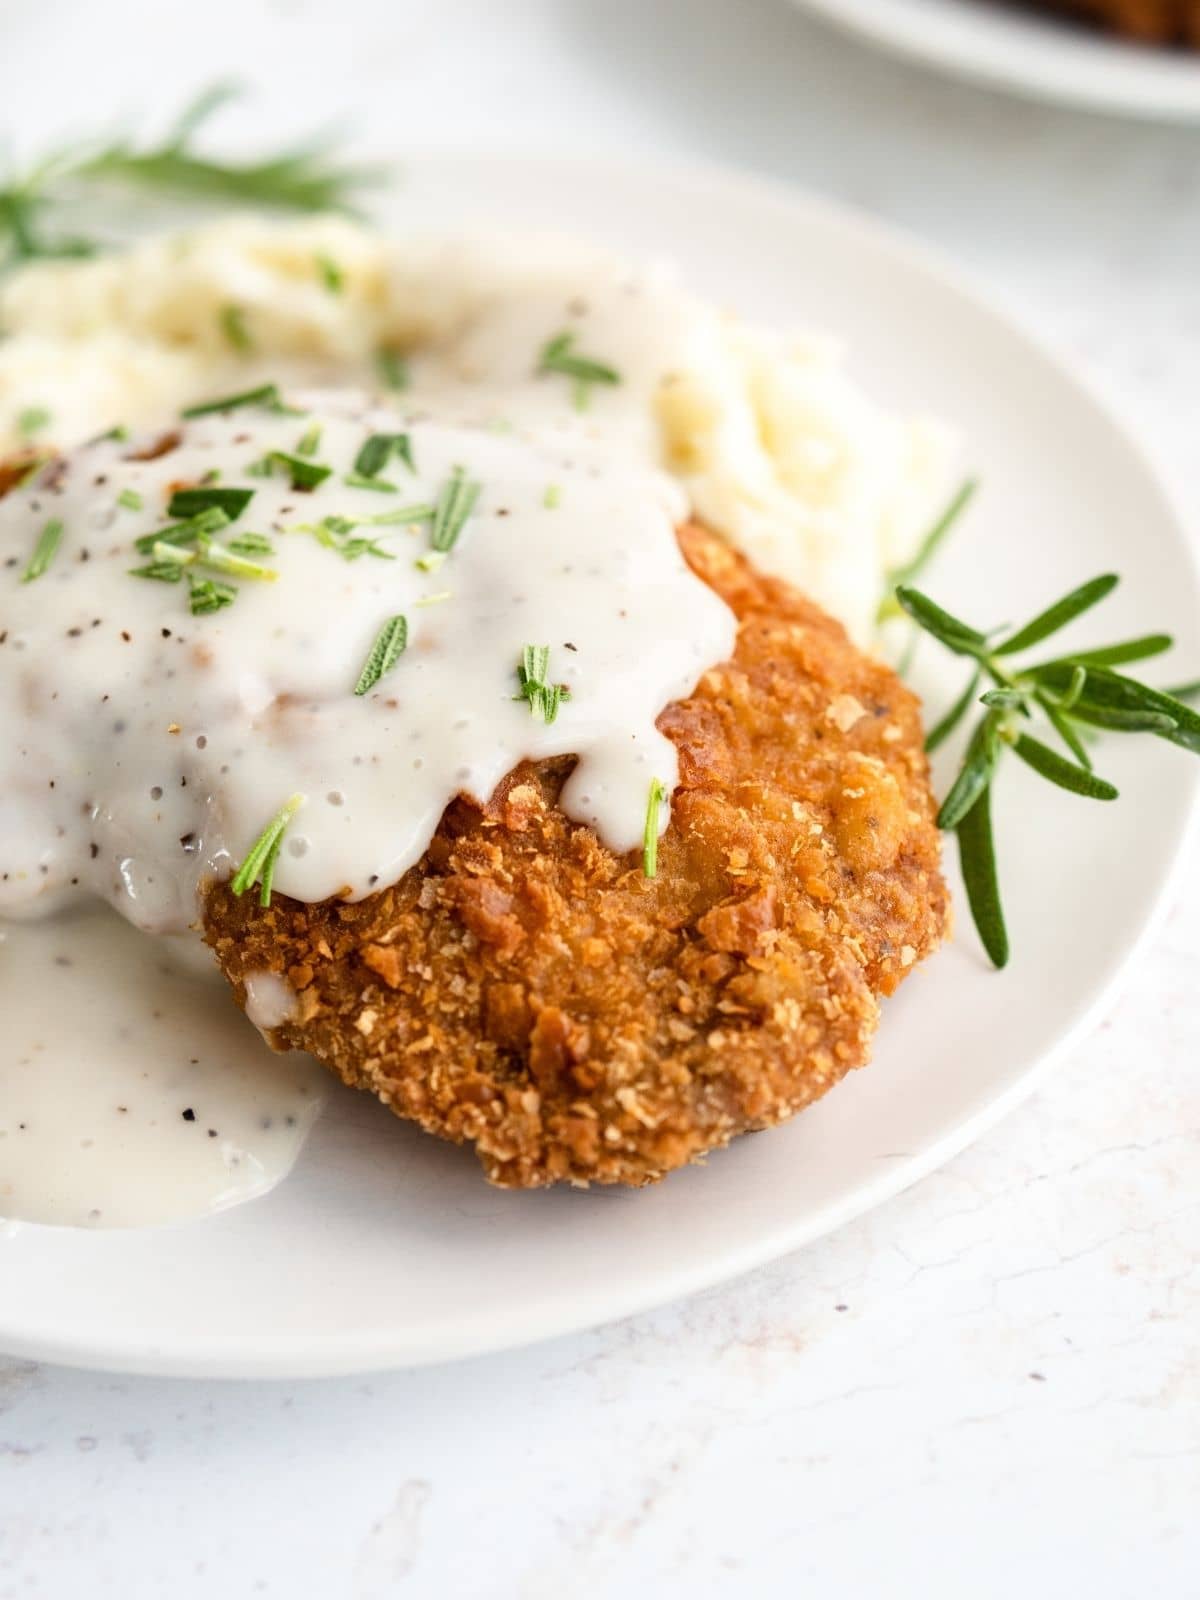 Chicken Fried Pork Chops Recipe/></p>
<p>If you’ve never made fried pork chops before, this is the easiest recipe for you. Despite the fact that it is a simple recipe, you’re going to enjoy the flavor and texture of this dish.</p>
<p><img decoding=